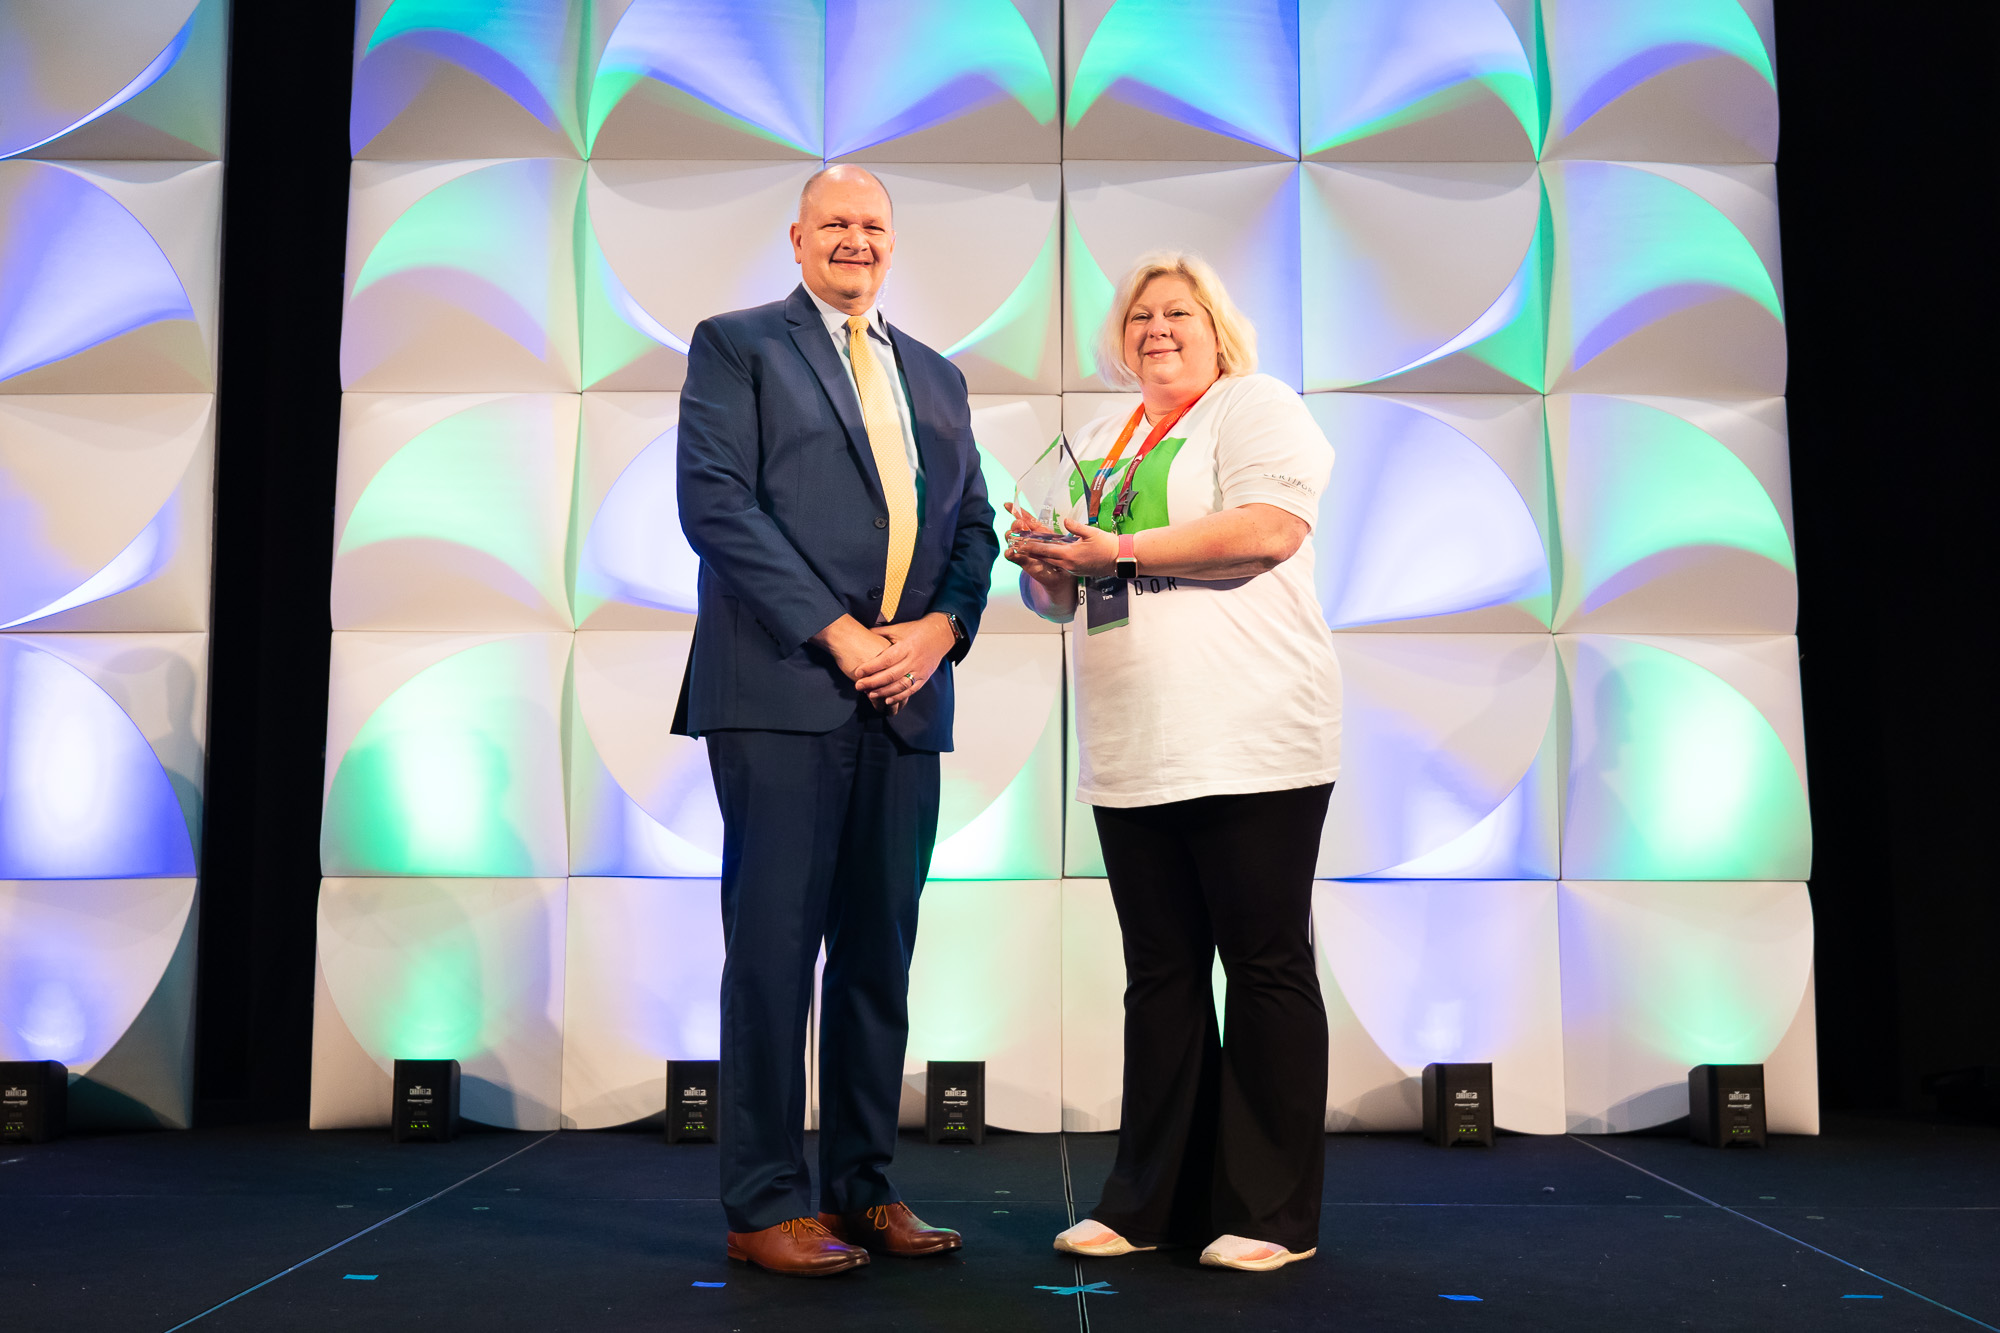 Carol York, CTE Teacher, at Cary High School in North Carolina, has been named Certiport's Educator of the Year